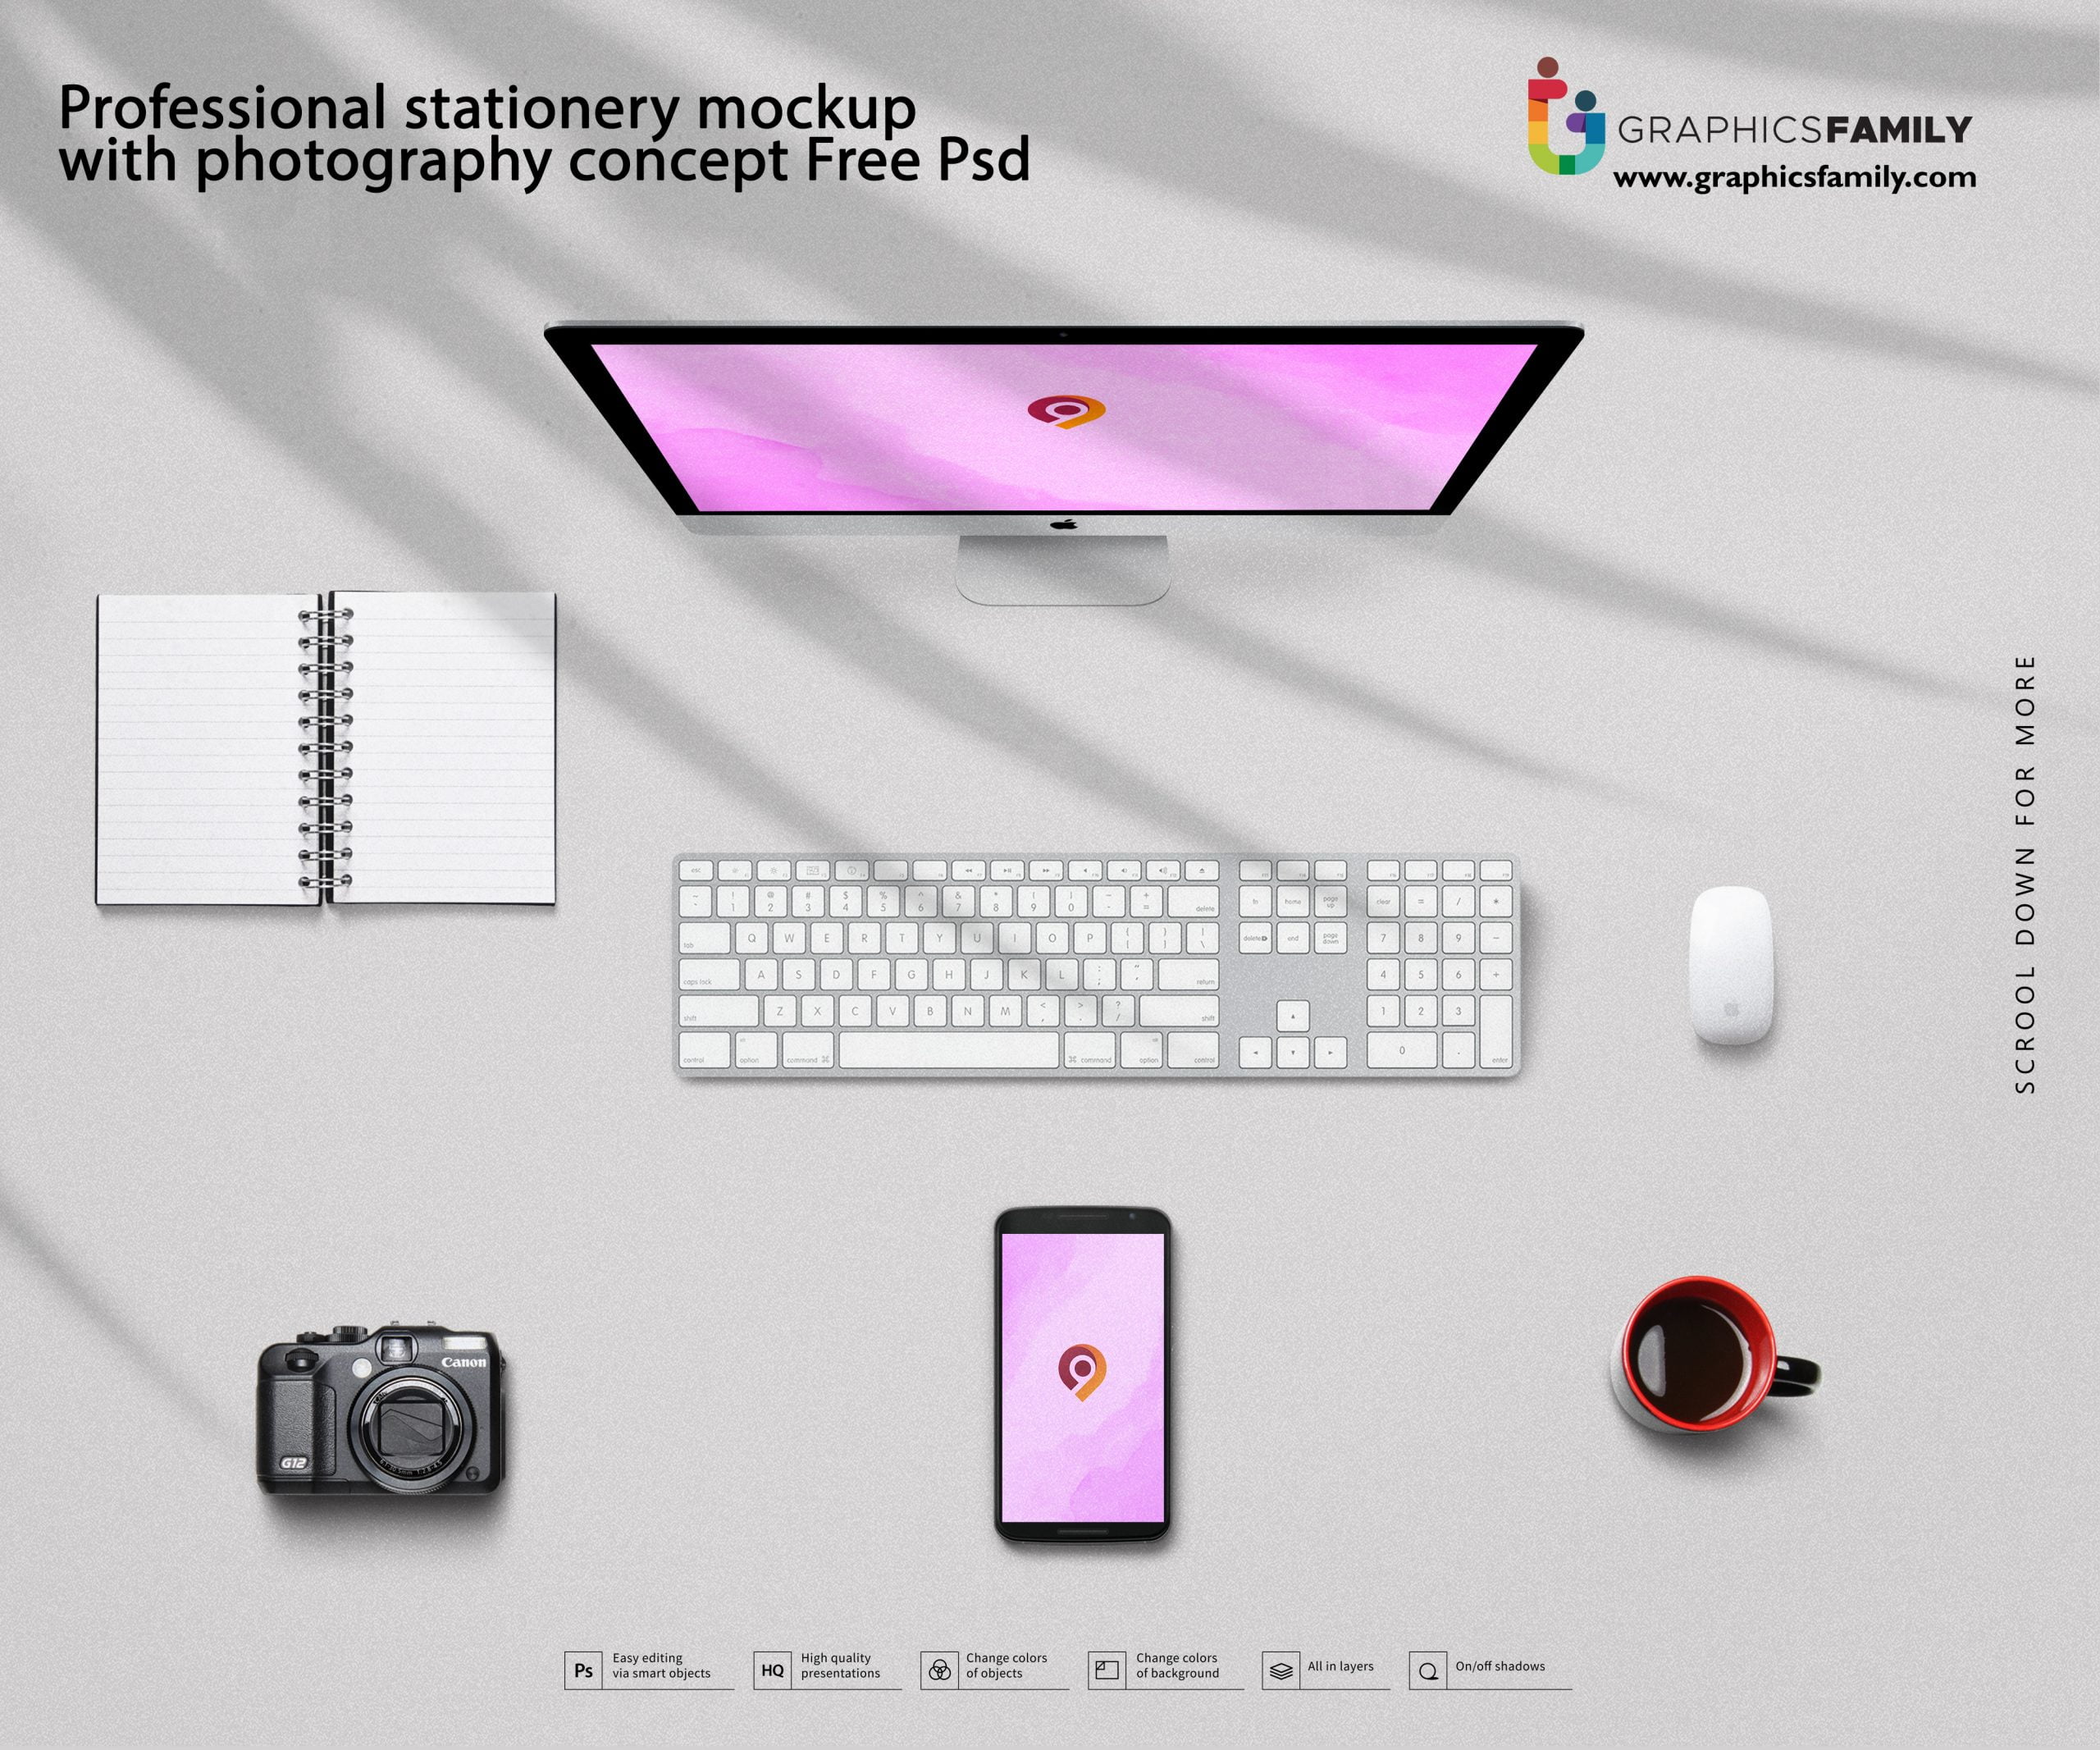 Professional stationery mockup with photography concept psd download